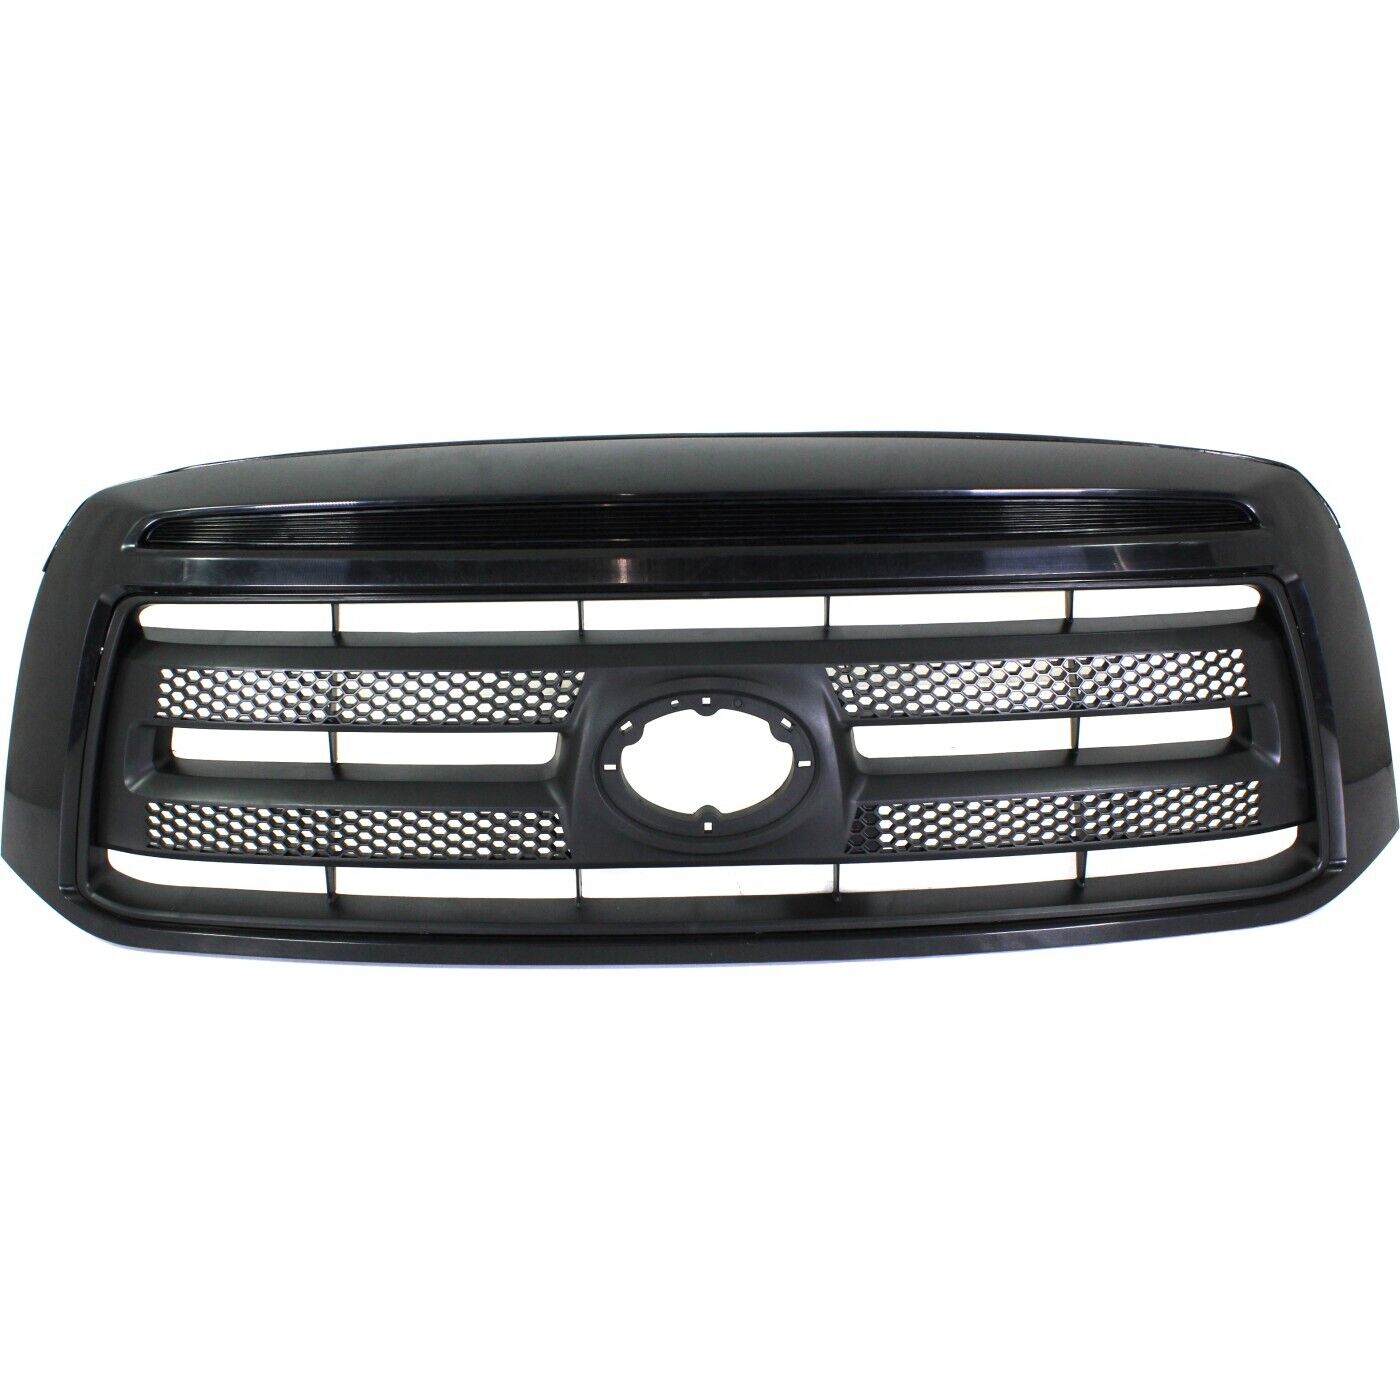 Grille For 2010-2011 2013 Toyota Tundra Black Plastic